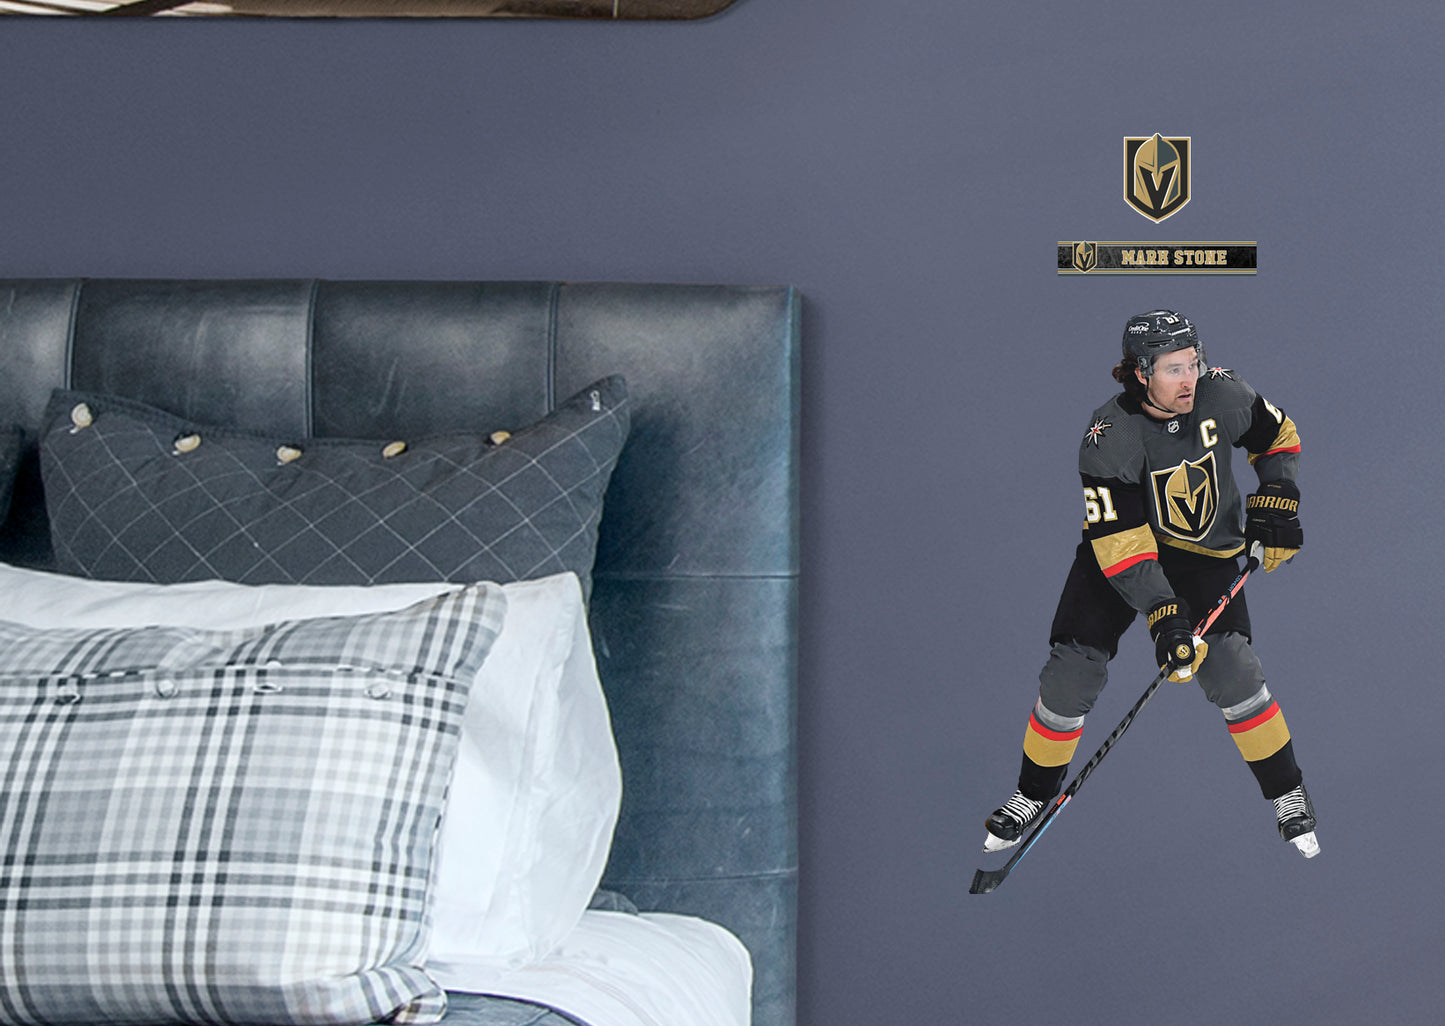 Vegas Golden Knights: Mark Stone 2021 - NHL Removable Wall Adhesive Wall Decal Life-Size Athlete +7 Wall Decals 46W x 76H